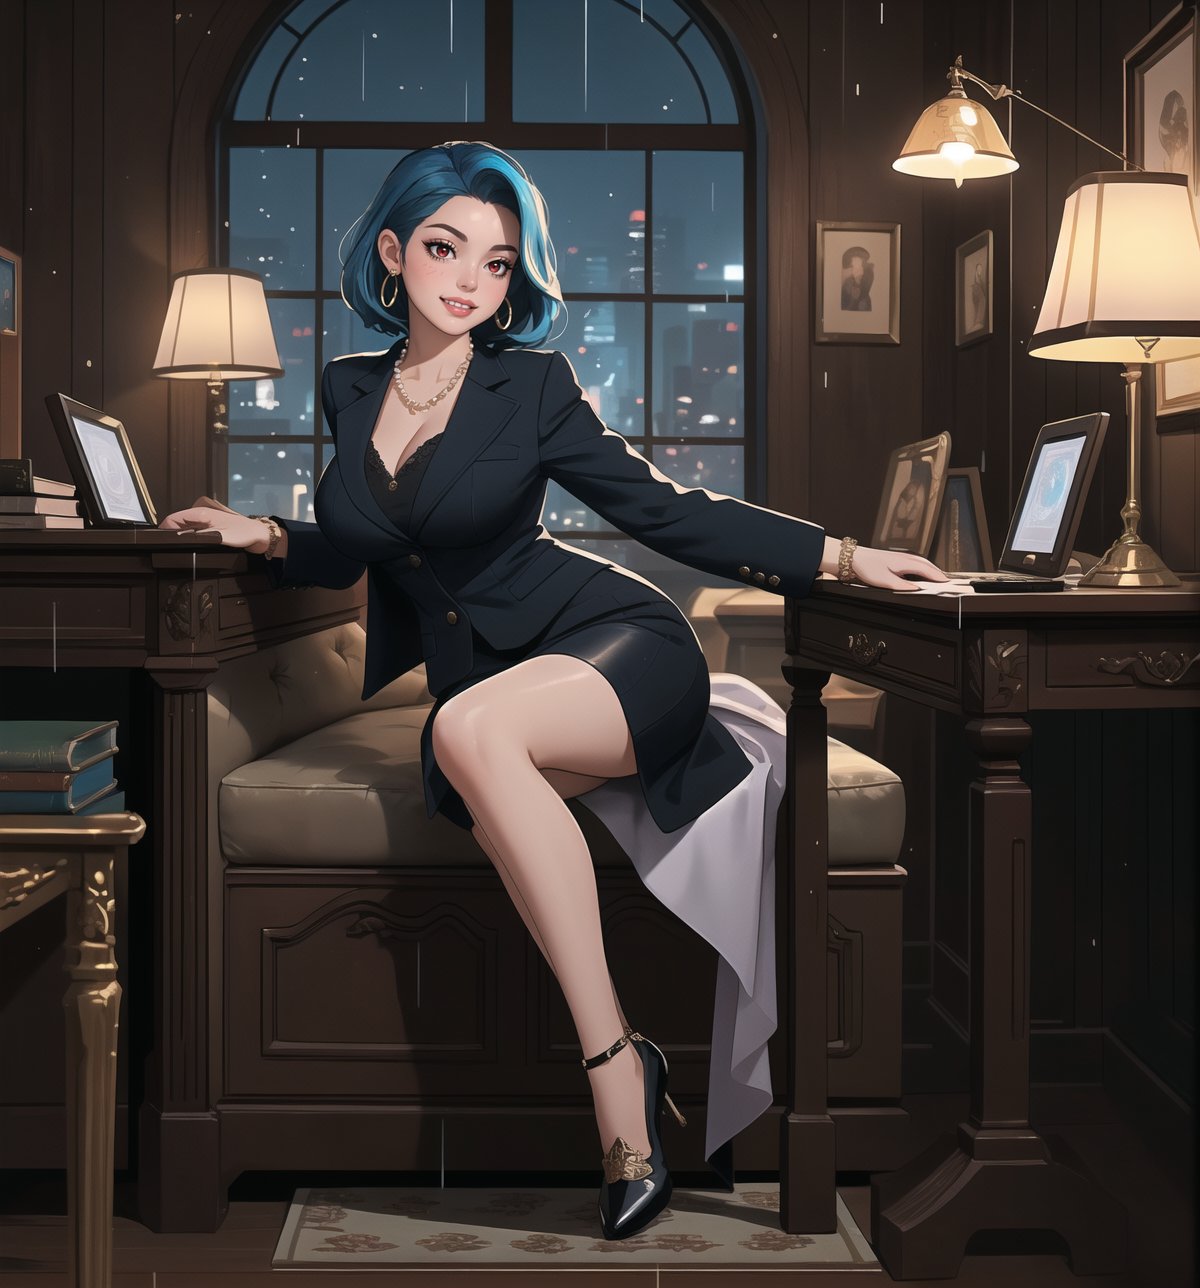 An ultra-detailed 4K fantasy-adventure masterpiece, rendered in ultra-high resolution with stunning graphical detail. | Sophia, a 35-year-old woman, is dressed in a lawyer's suit, consisting of a white blouse, black skirt and black jacket. She also wears a pearl necklace, pearl earrings, a gold bracelet, and a gold wristwatch. Her short blue hair is slicked back in a sleek, modern cut. Her red eyes are looking straight at the viewer, while she ((smiles and shows her teeth)), wearing bright red lipstick and war paint on her face. It is located in a law office, with wooden structures, a window showing the city at night, raining heavily, metal structures and a computer on the table. The light from the table lamp illuminates the room, creating a professional and focused atmosphere. | The image highlights Sophia's sensual and strong figure and the elements of the law office, creating an atmosphere of mystery and adventure. Dramatic lighting creates deep shadows and highlights details in the scene. | Soft, moody lighting effects create a relaxing and mysterious atmosphere, while rough, detailed textures on structures and decor add realism to the image. | A sensual and terrifying scene of a beautiful woman in a law office at night, fusing fantasy and adventure art elements. | (((The image reveals a full-body shot as Sophia assumes a sensual pose, engagingly leaning against a structure within the scene in an exciting manner. She takes on a sensual pose as she interacts, boldly leaning on a structure, leaning back and boldly throwing herself onto the structure, reclining back in an exhilarating way.))). | ((((full-body shot)))), ((perfect pose)), ((perfect limbs, perfect fingers, better hands, perfect hands))++, ((perfect legs, perfect feet))++, ((huge breasts)), ((perfect design)), ((perfect composition)), ((very detailed scene, very detailed background, perfect layout, correct imperfections)), Enhance++, Ultra details++, More Detail++